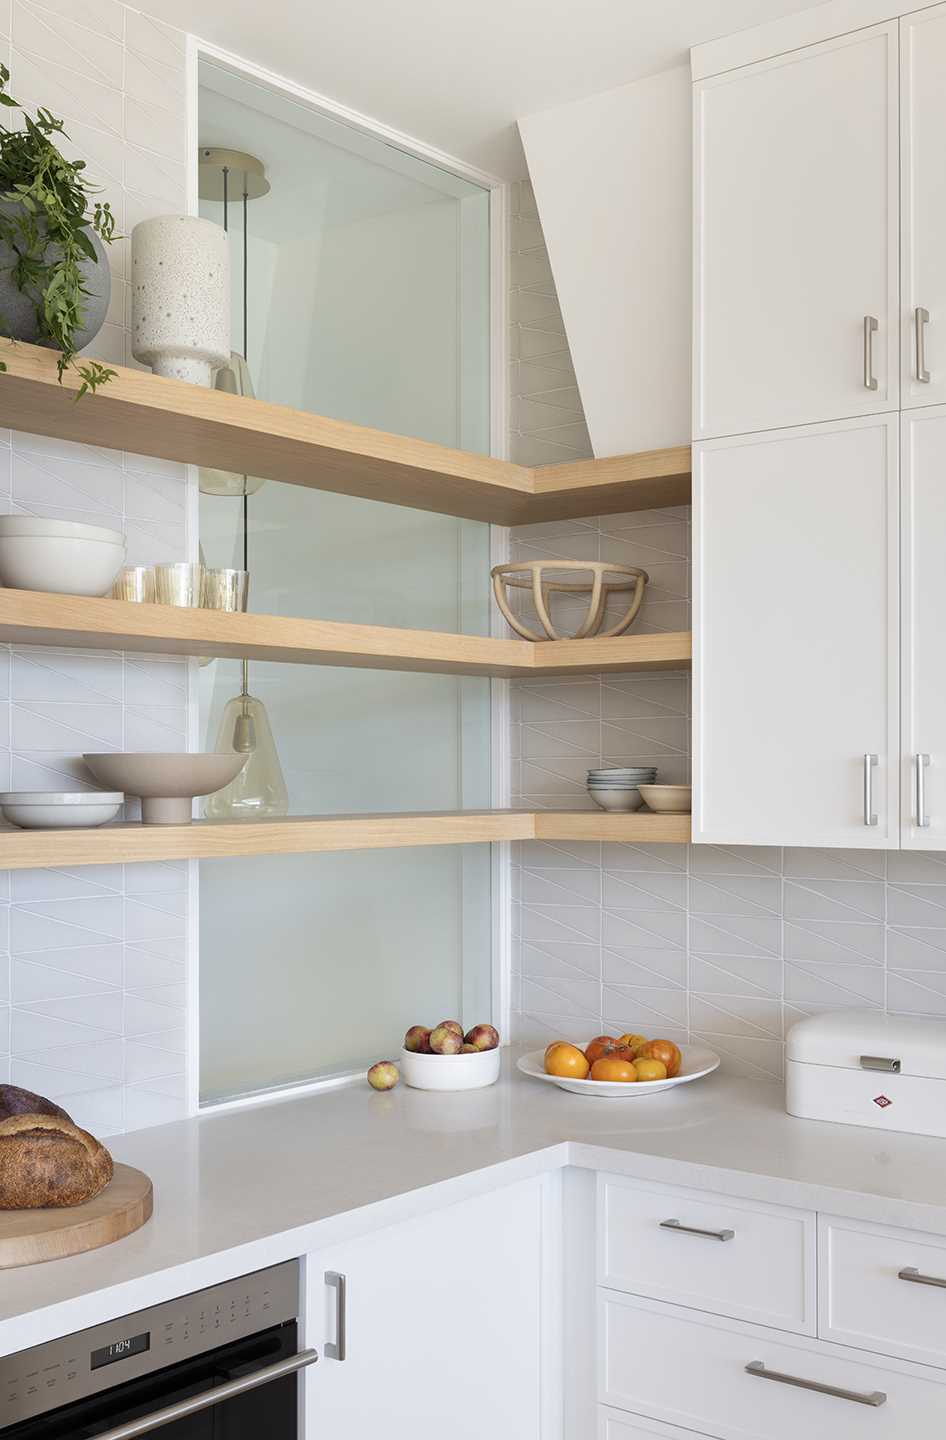 In the kitchen, white cabinets reach to the ceiling, while wood accents provide a natural touch, and a kitchen island includes a wine fridge and a place for seating. A window behind some shelves provides a glimpse of lights in the stairwell.